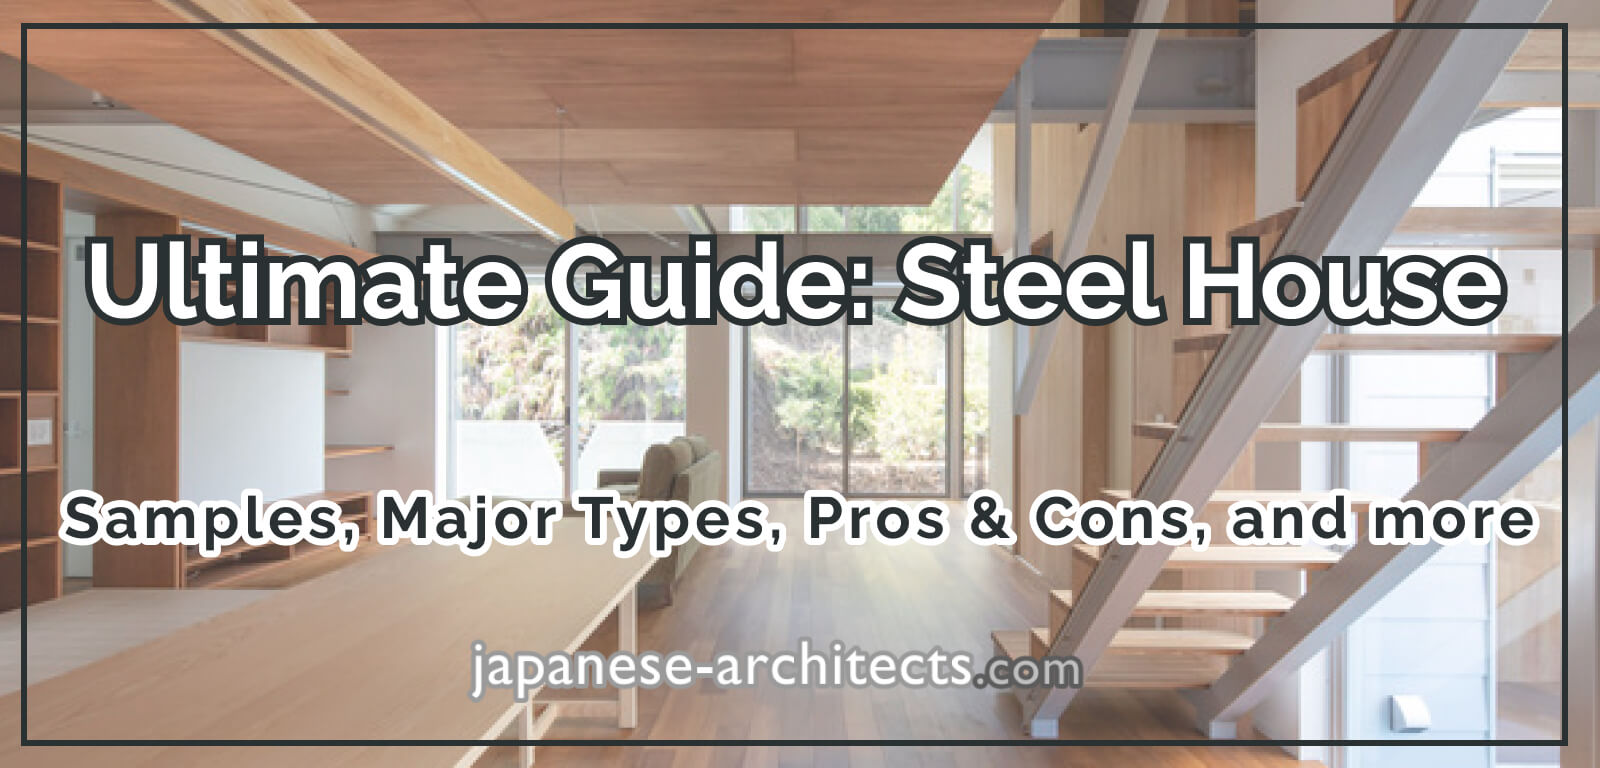 Ultimate Guide: Steel House